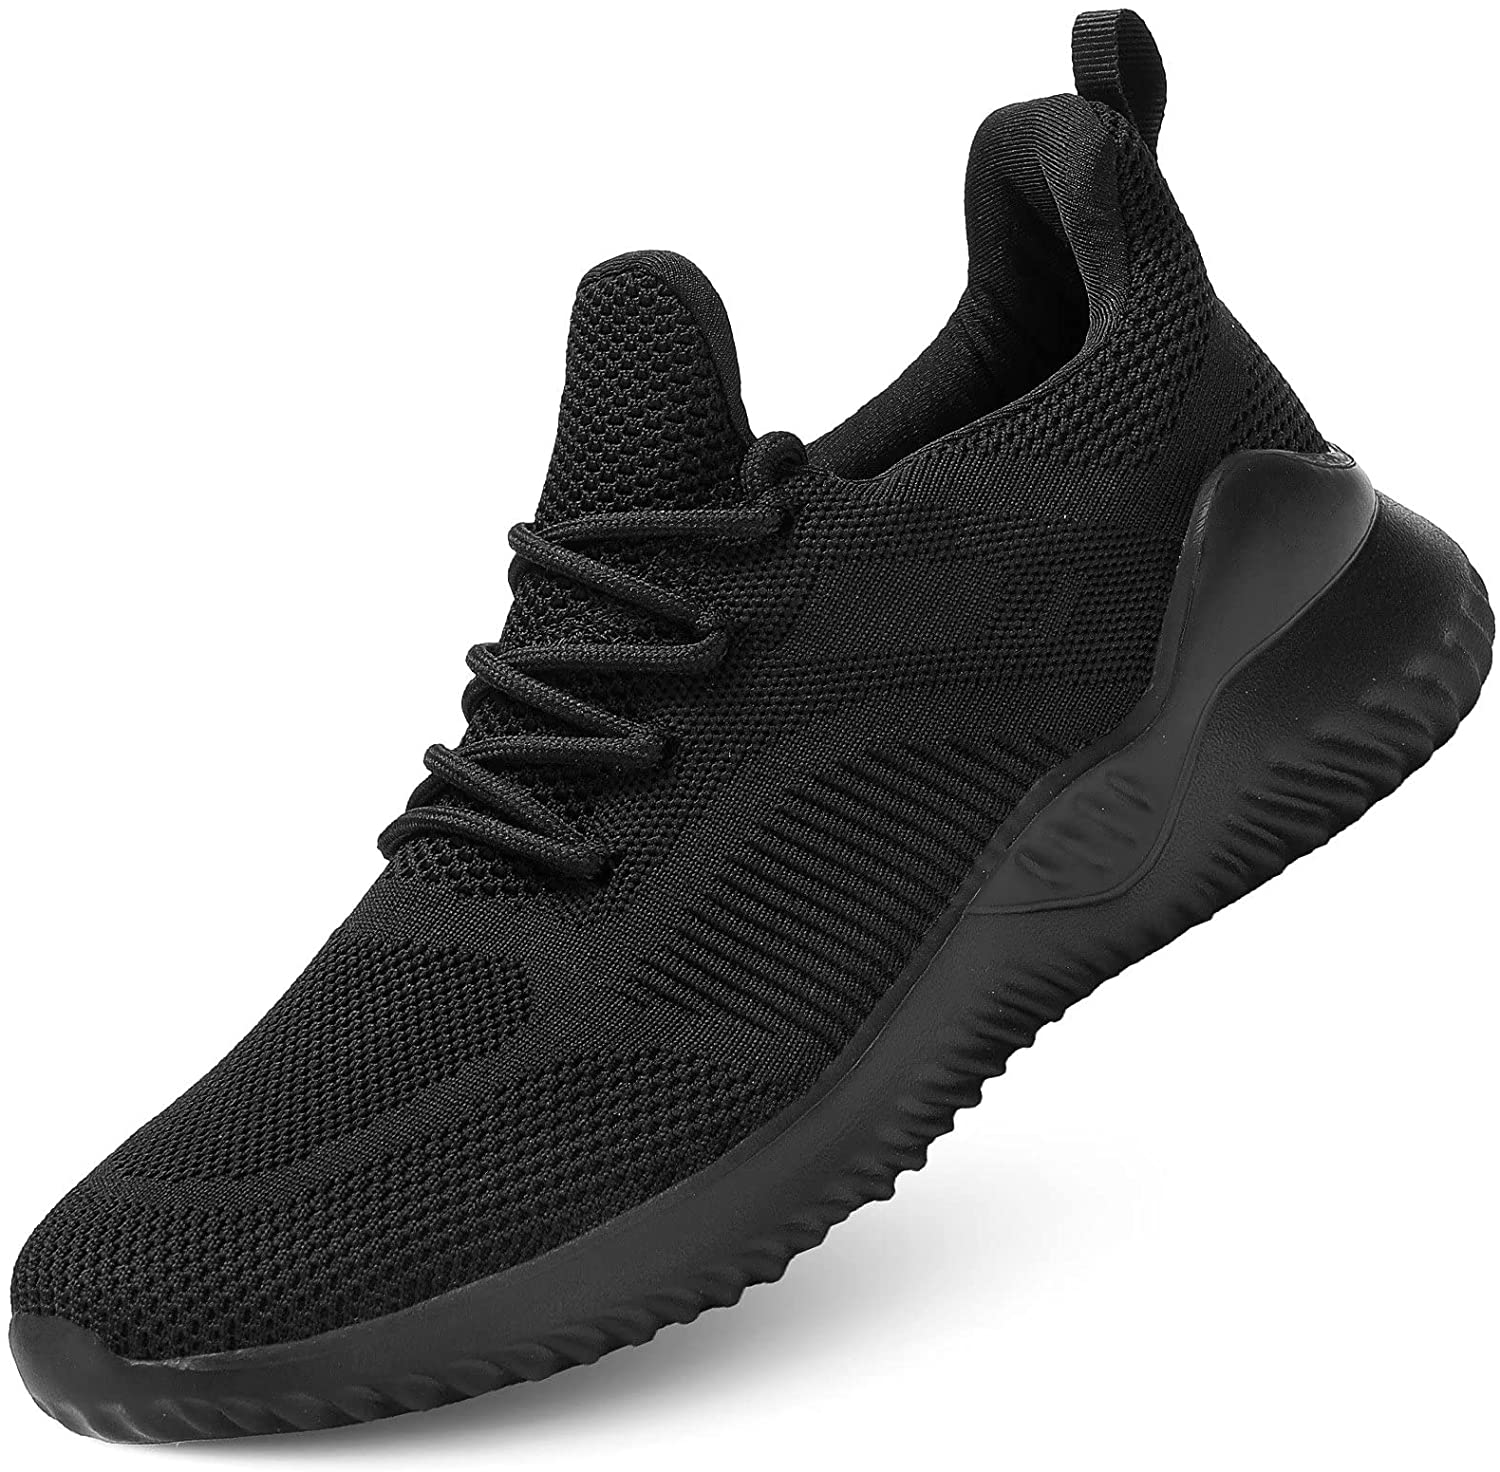 Wrezatro Mens Breathable Athletic Running Sneakers Mesh Light Walking Gym Shoes Fashion Personality Volleyball Footwear Outdoor 